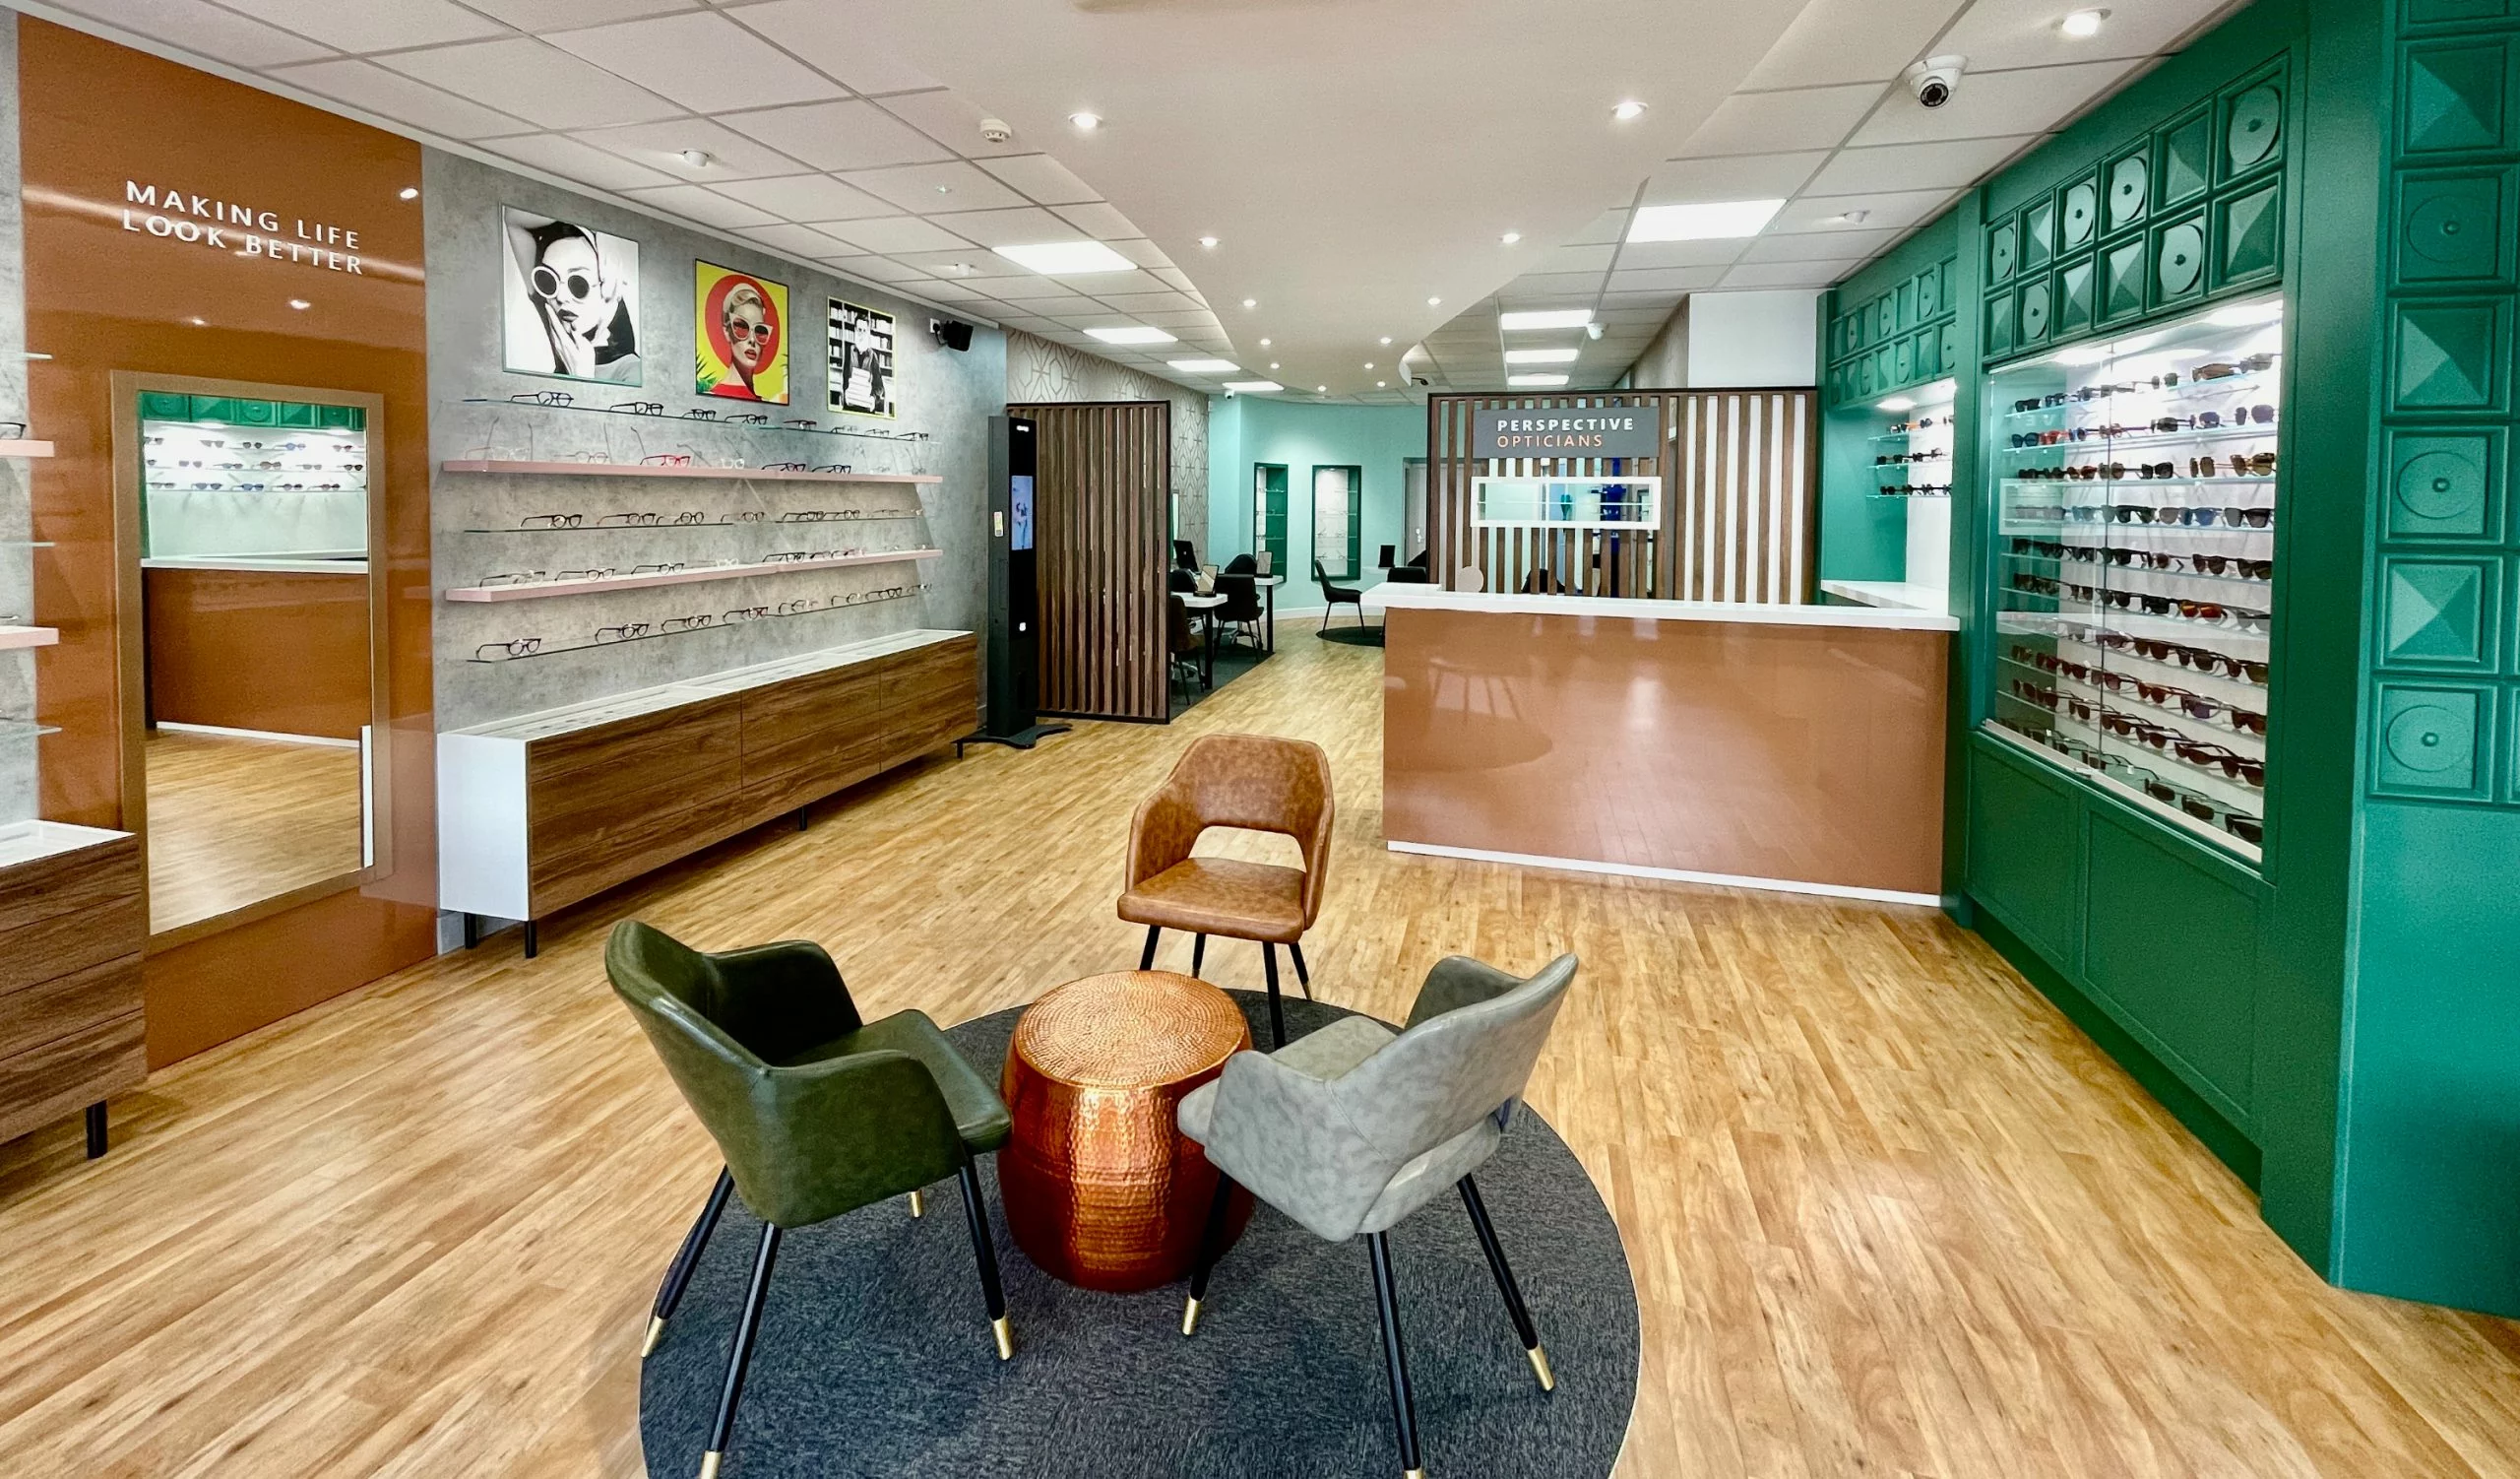 The retail space at Perspective Opticians